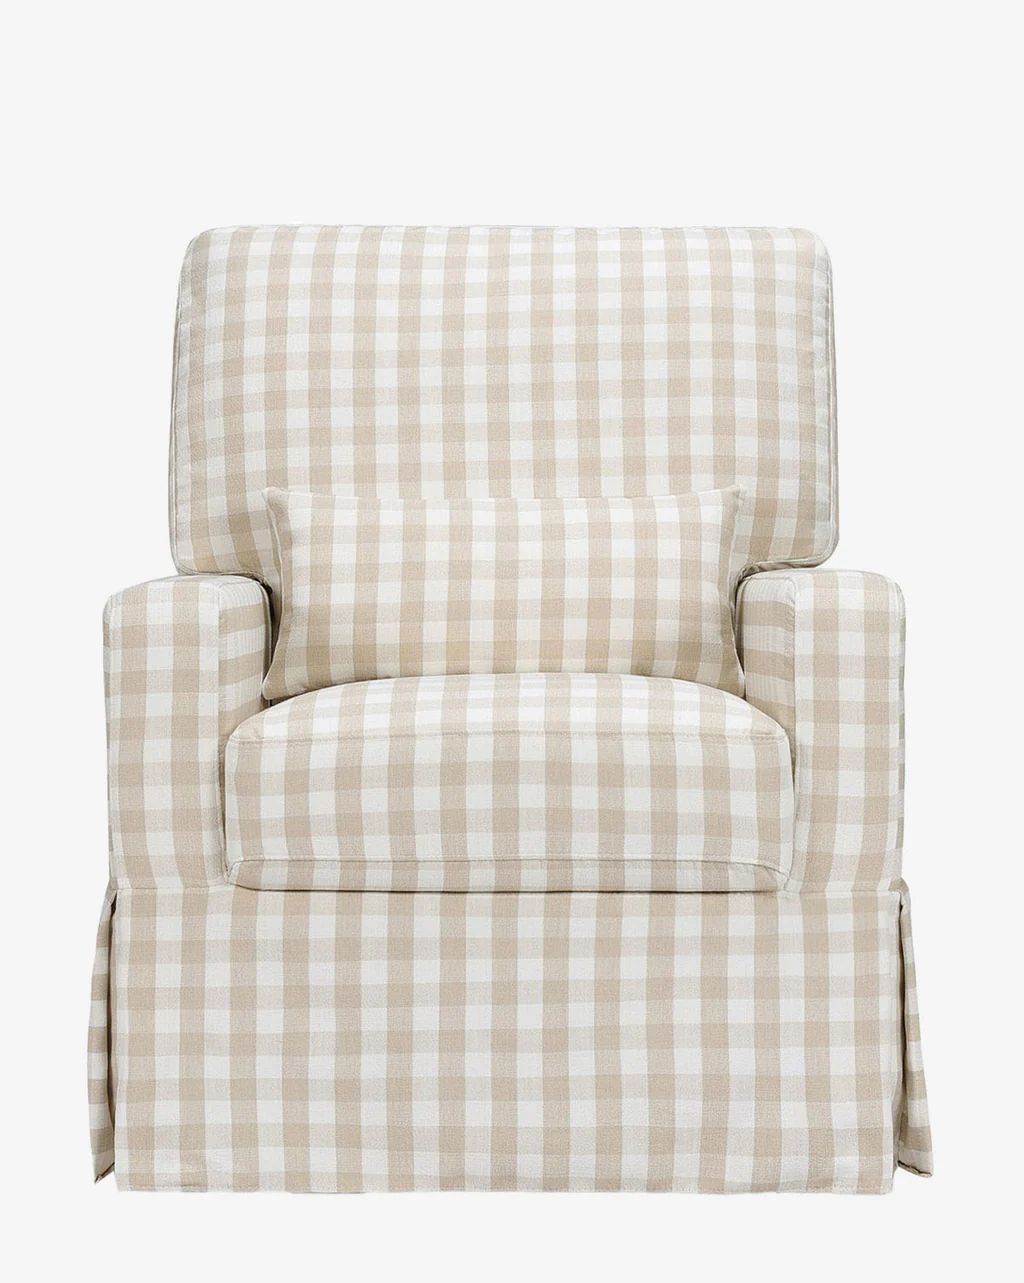 Crawford Pillowback Comfort Swivel Glider in Gingham | McGee & Co.